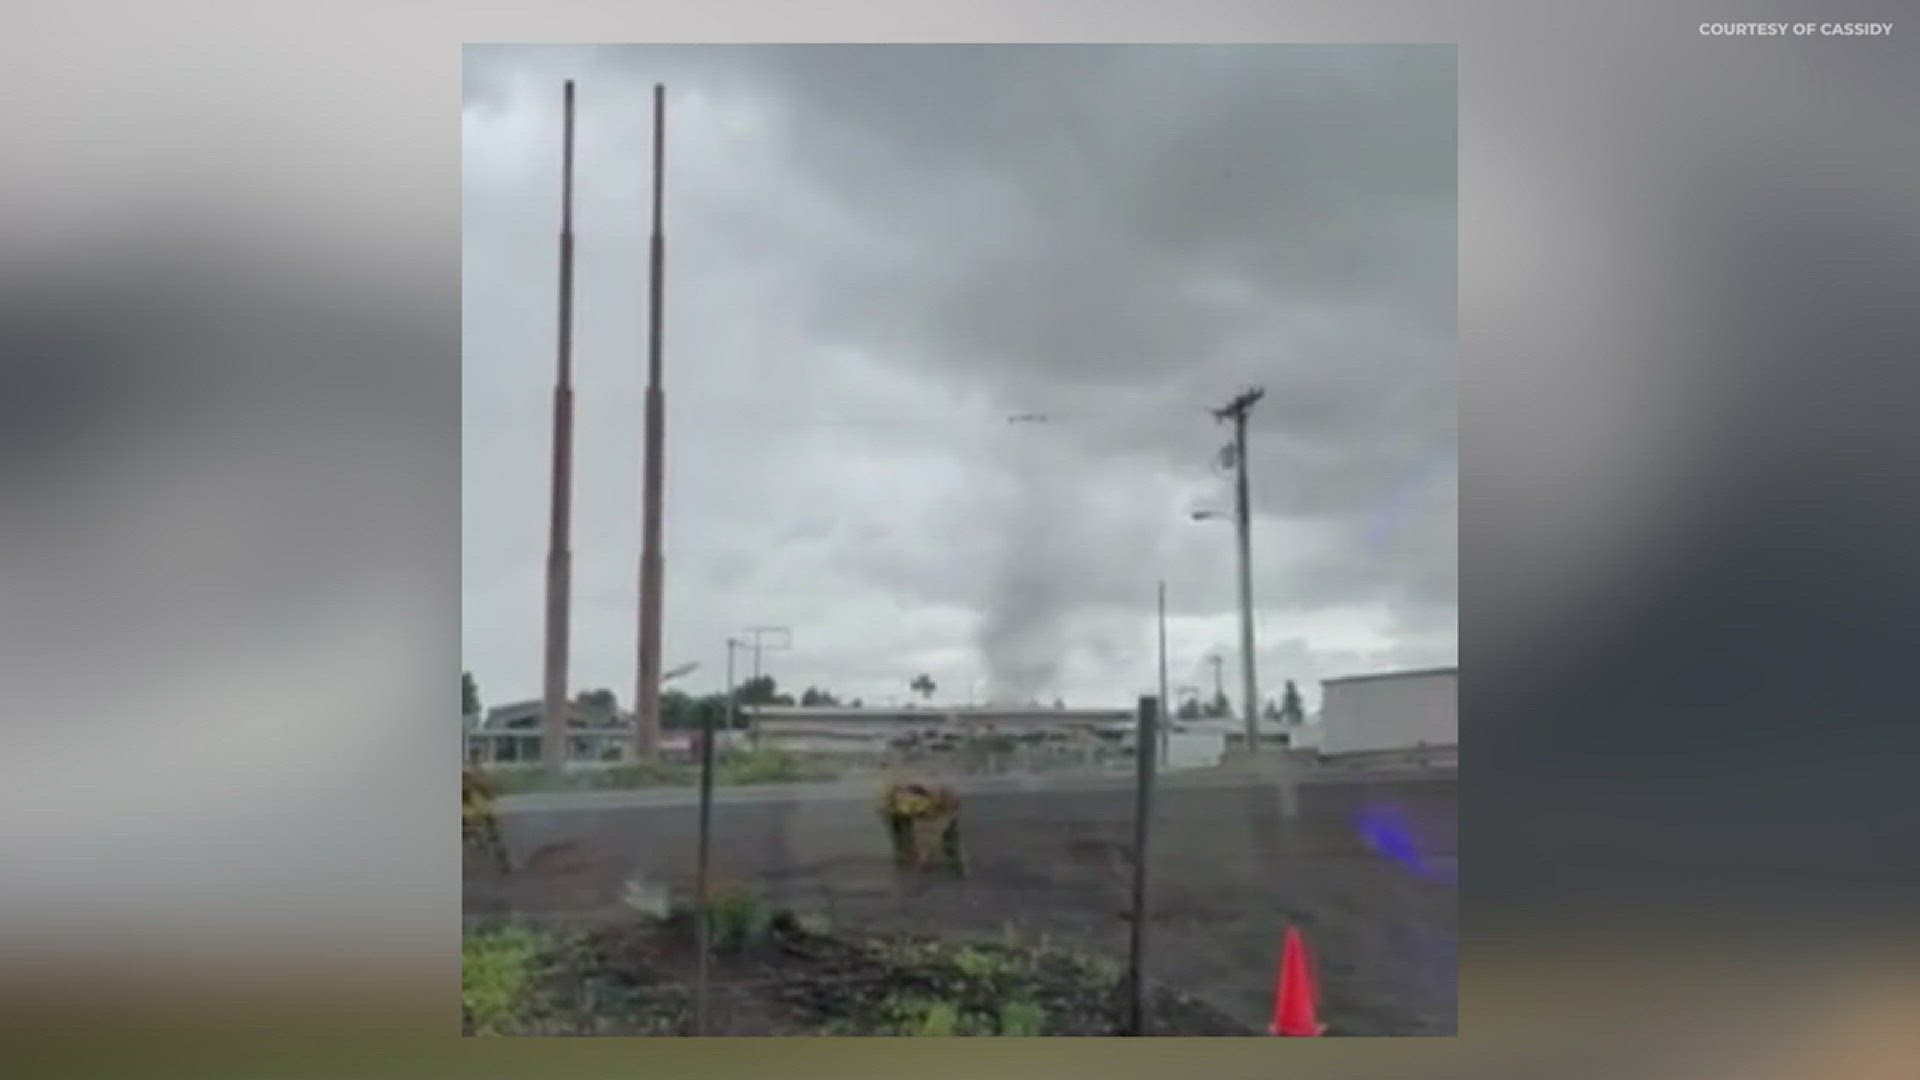 The National Weather Service confirmed, an EF-0 tornado happened near Daniels Field Airport near I-5 Sunday afternoon.